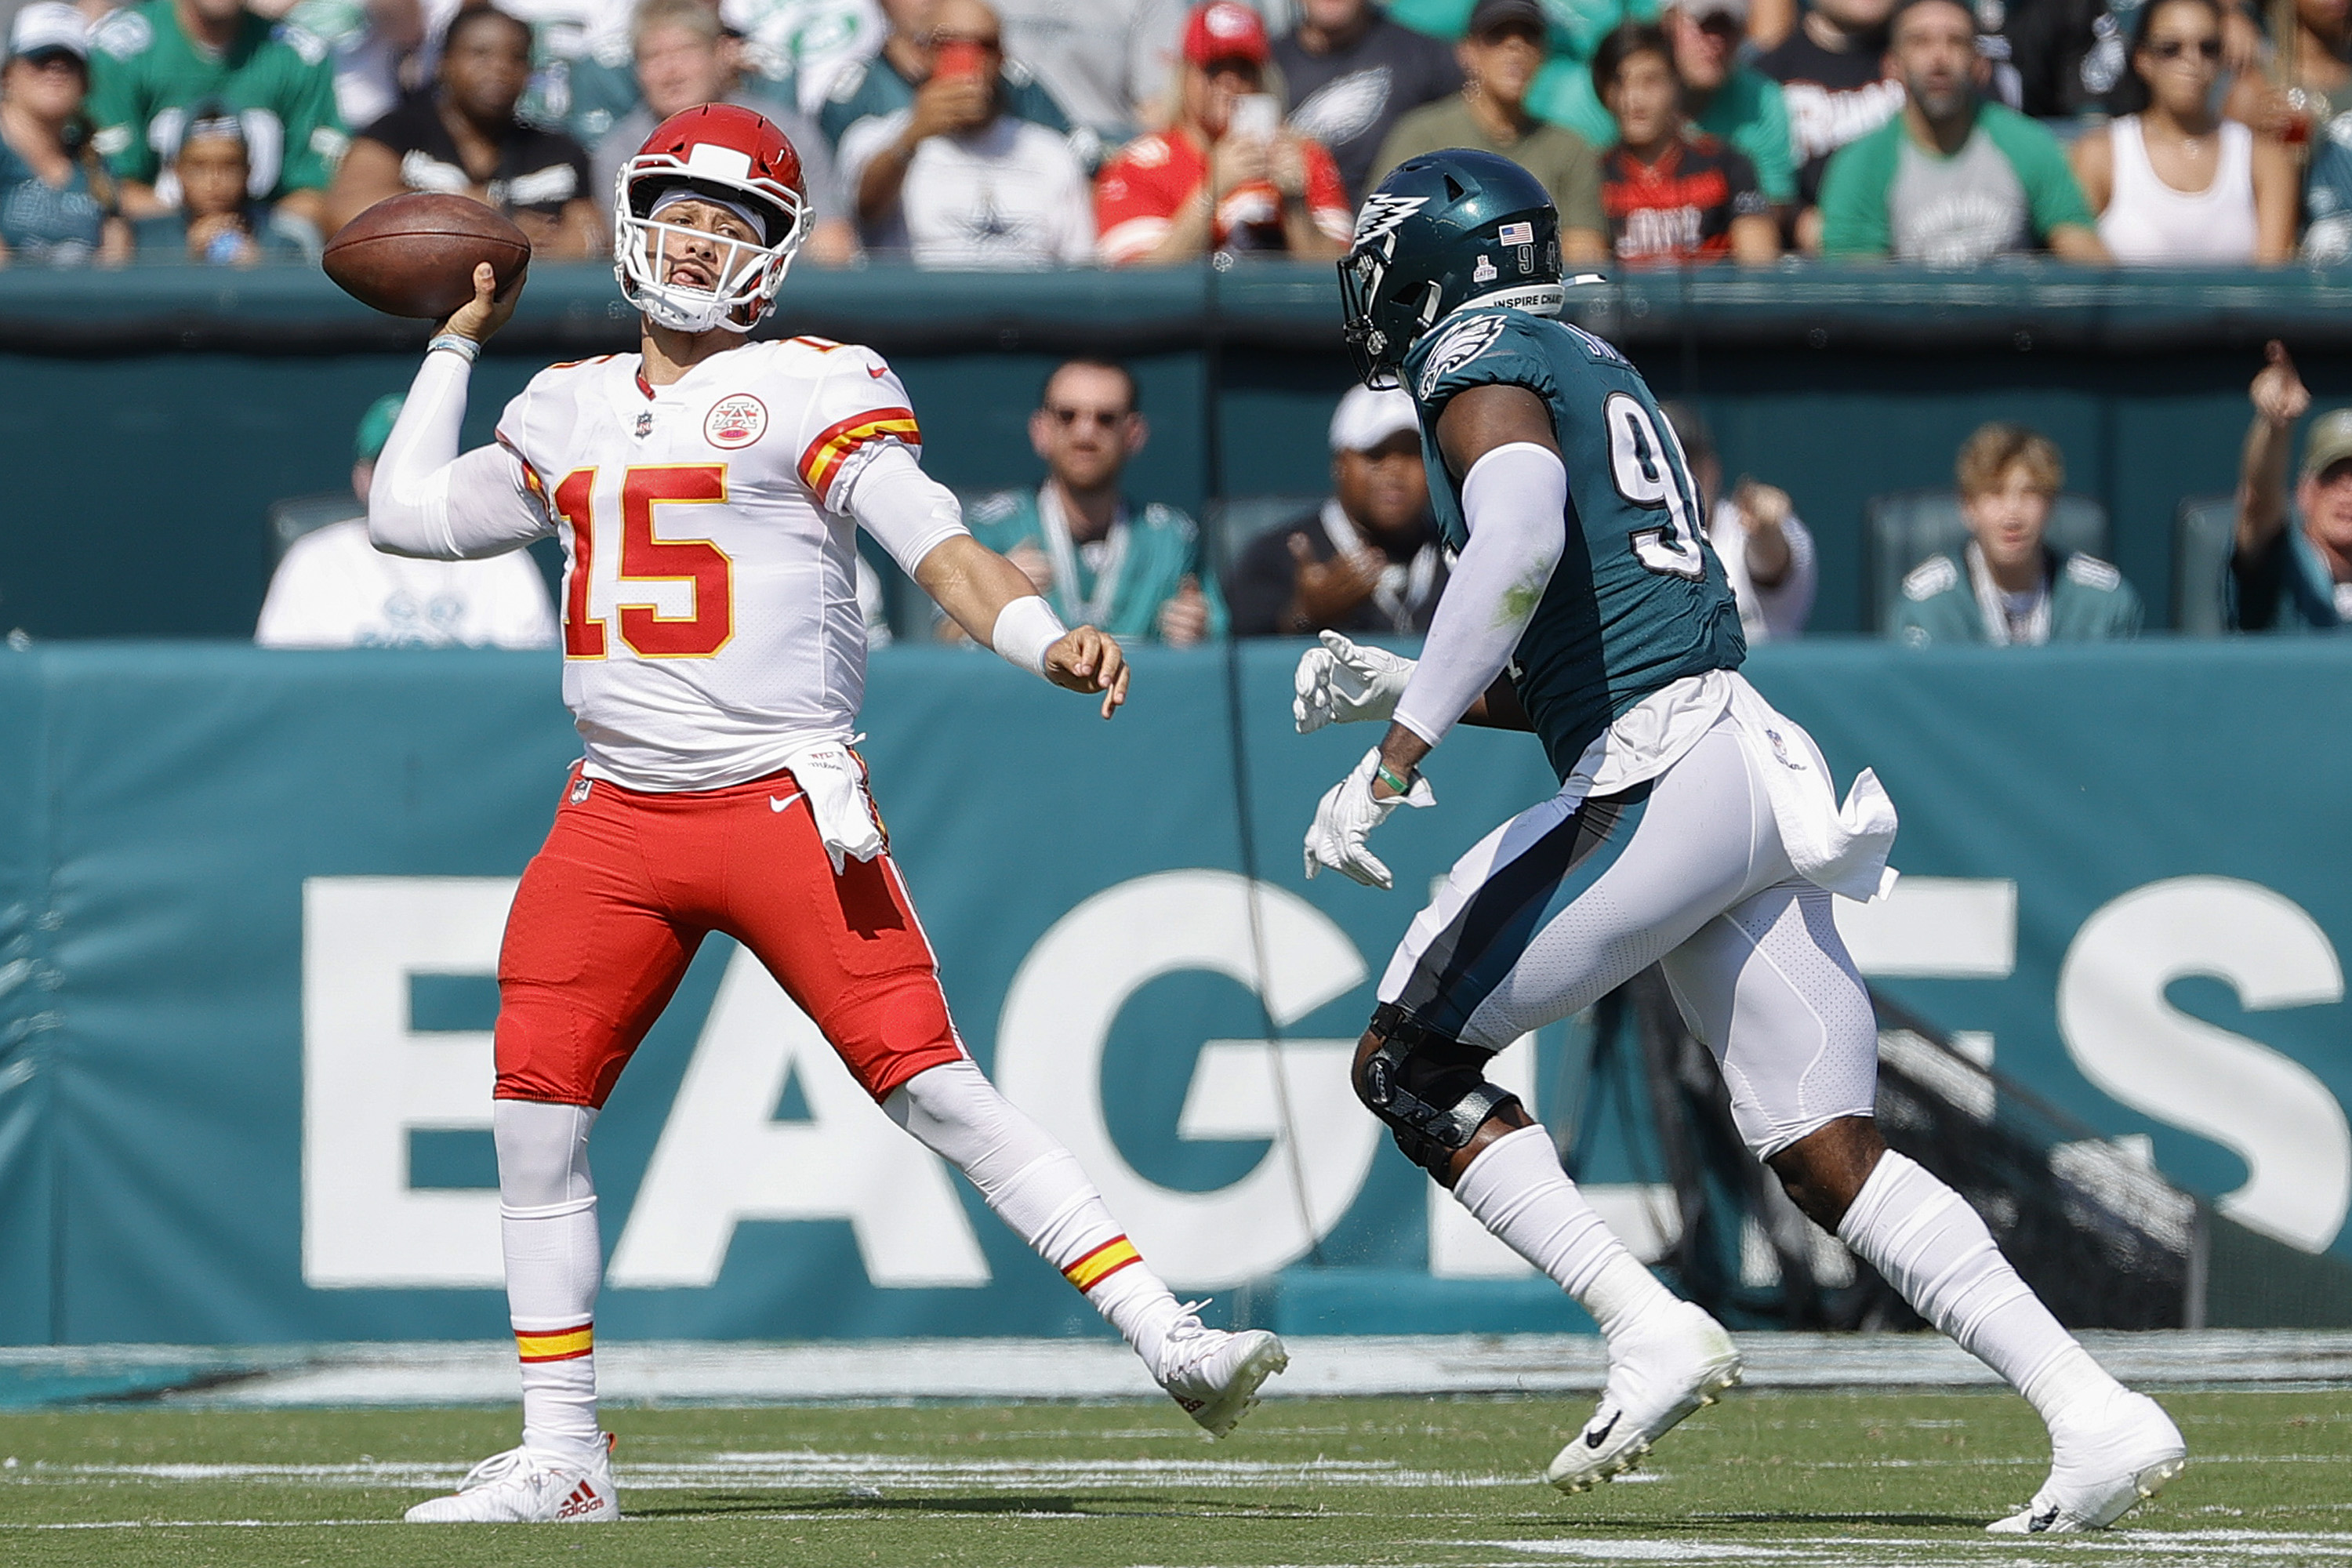 Chiefs set to face Eagles in Super Bowl LVII